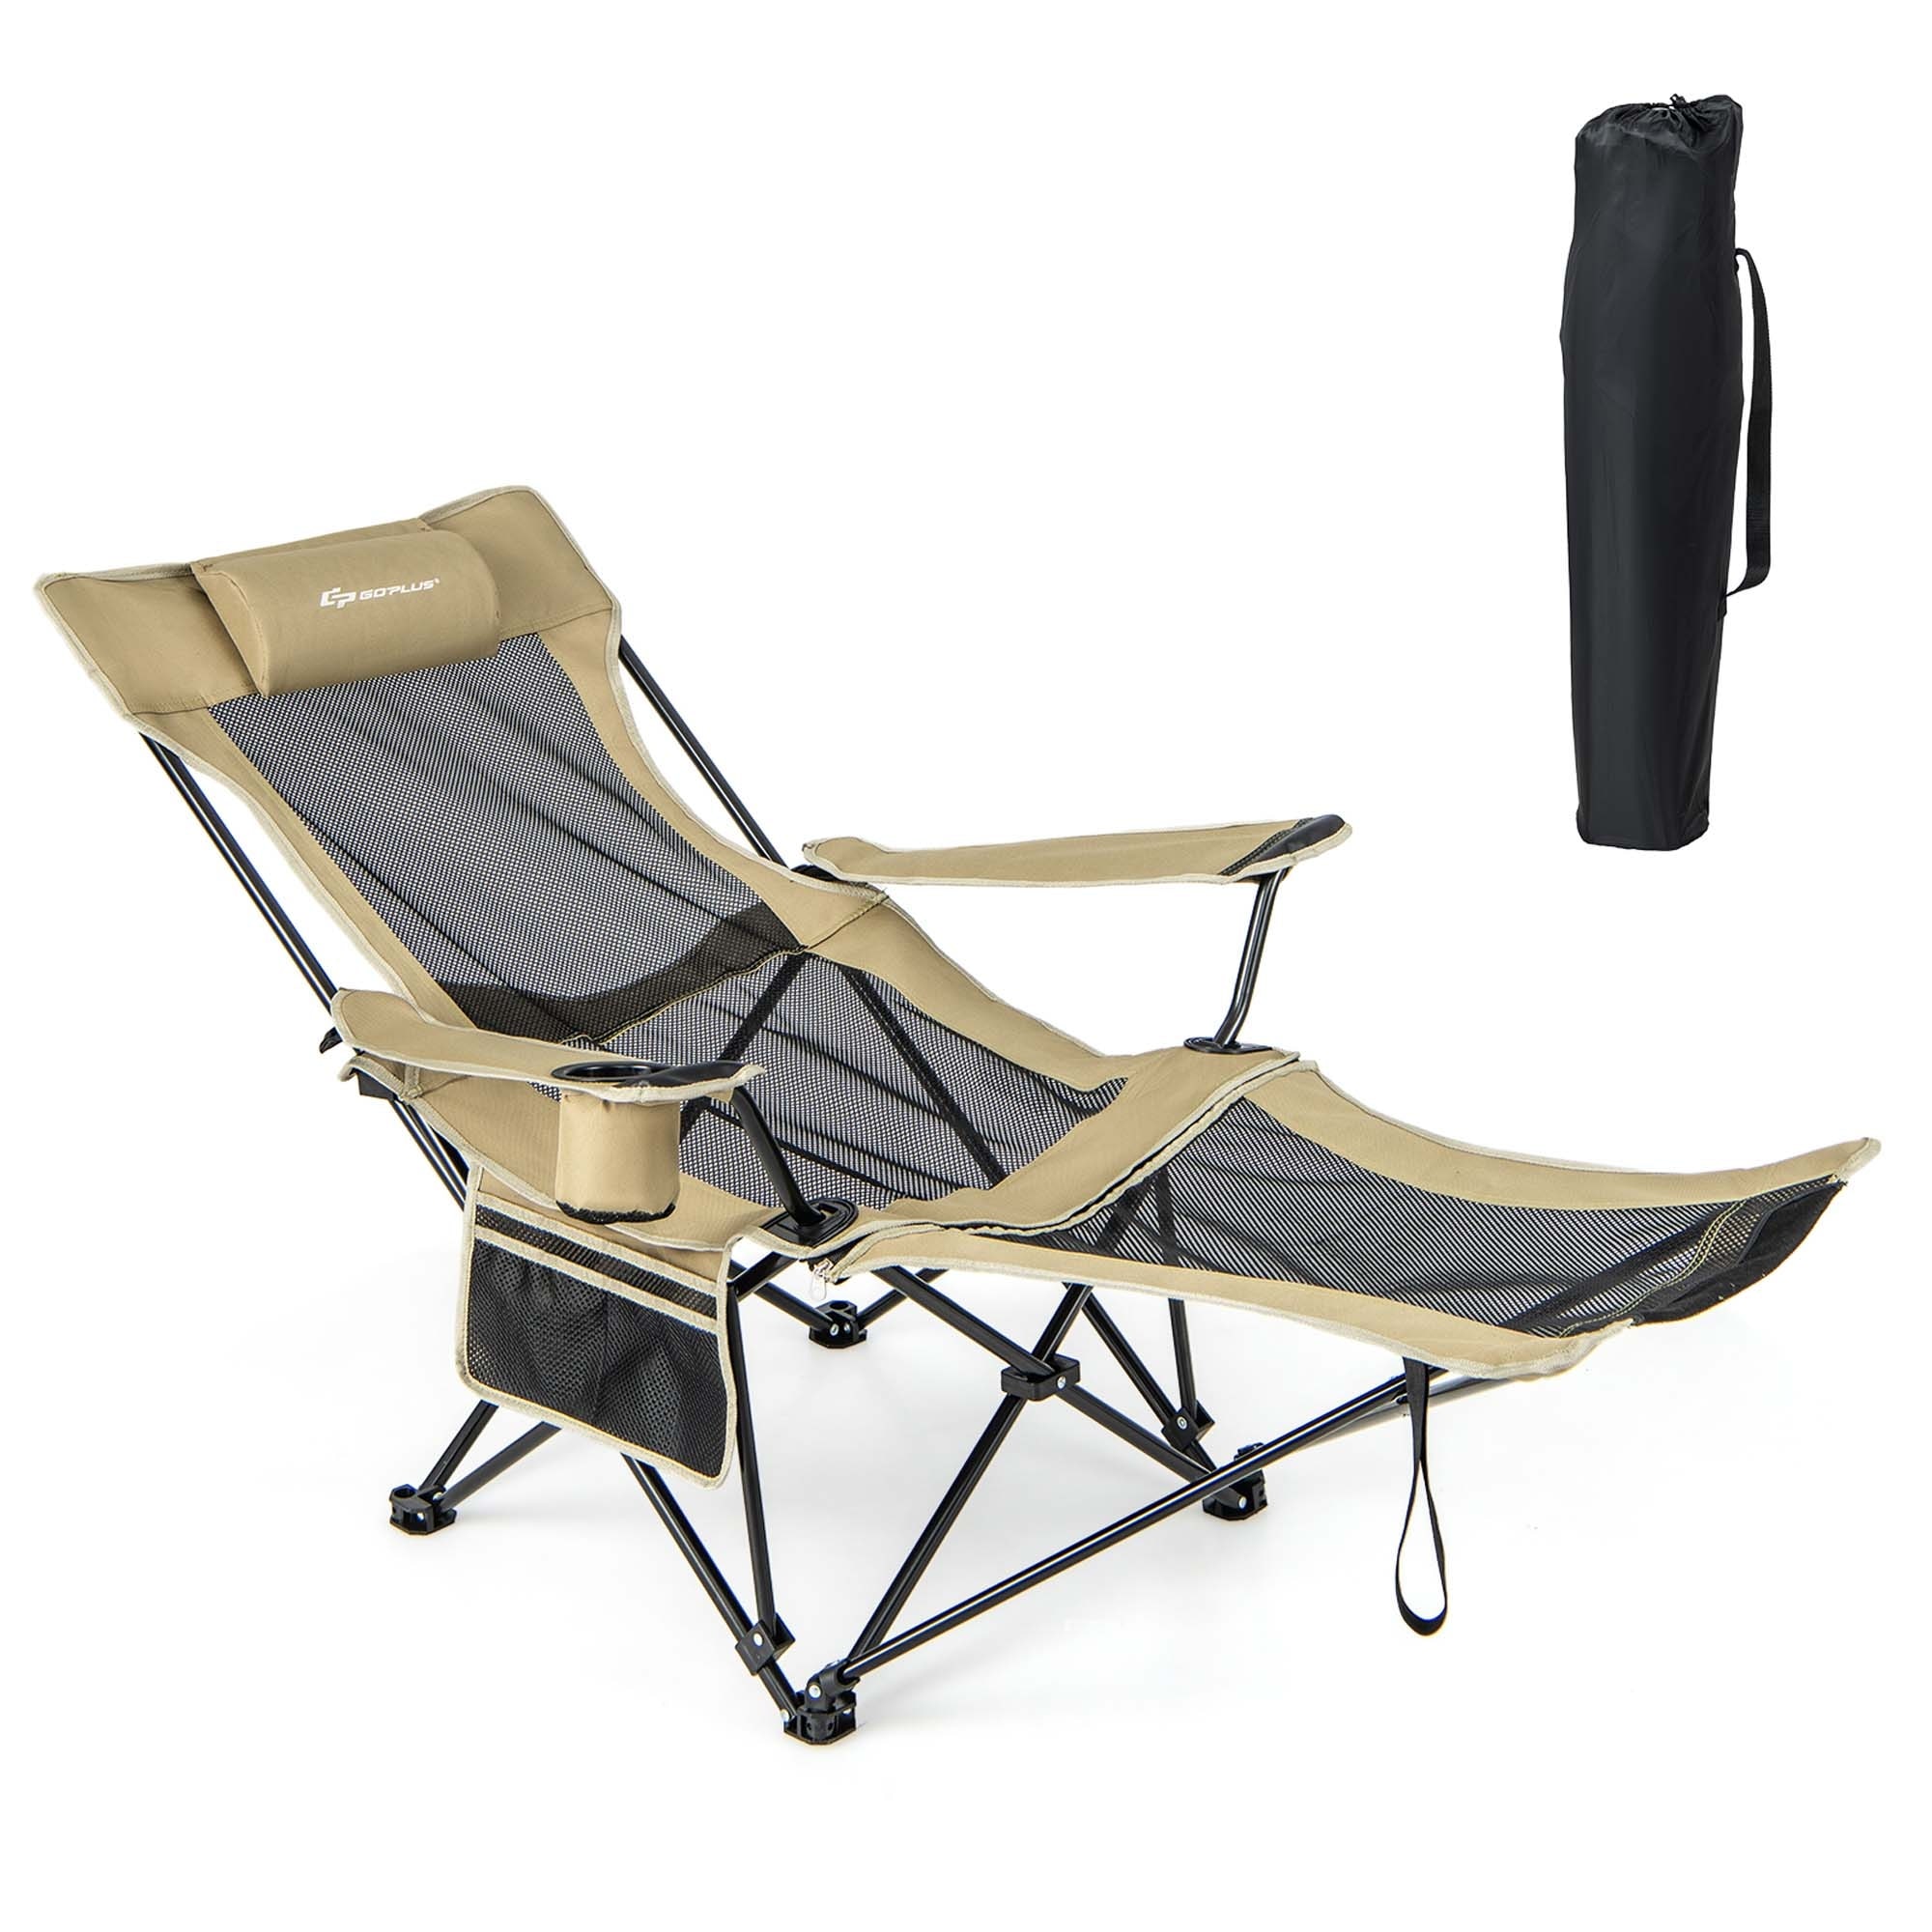 Camping Chairs Outdoor Seating - Bed Bath & Beyond